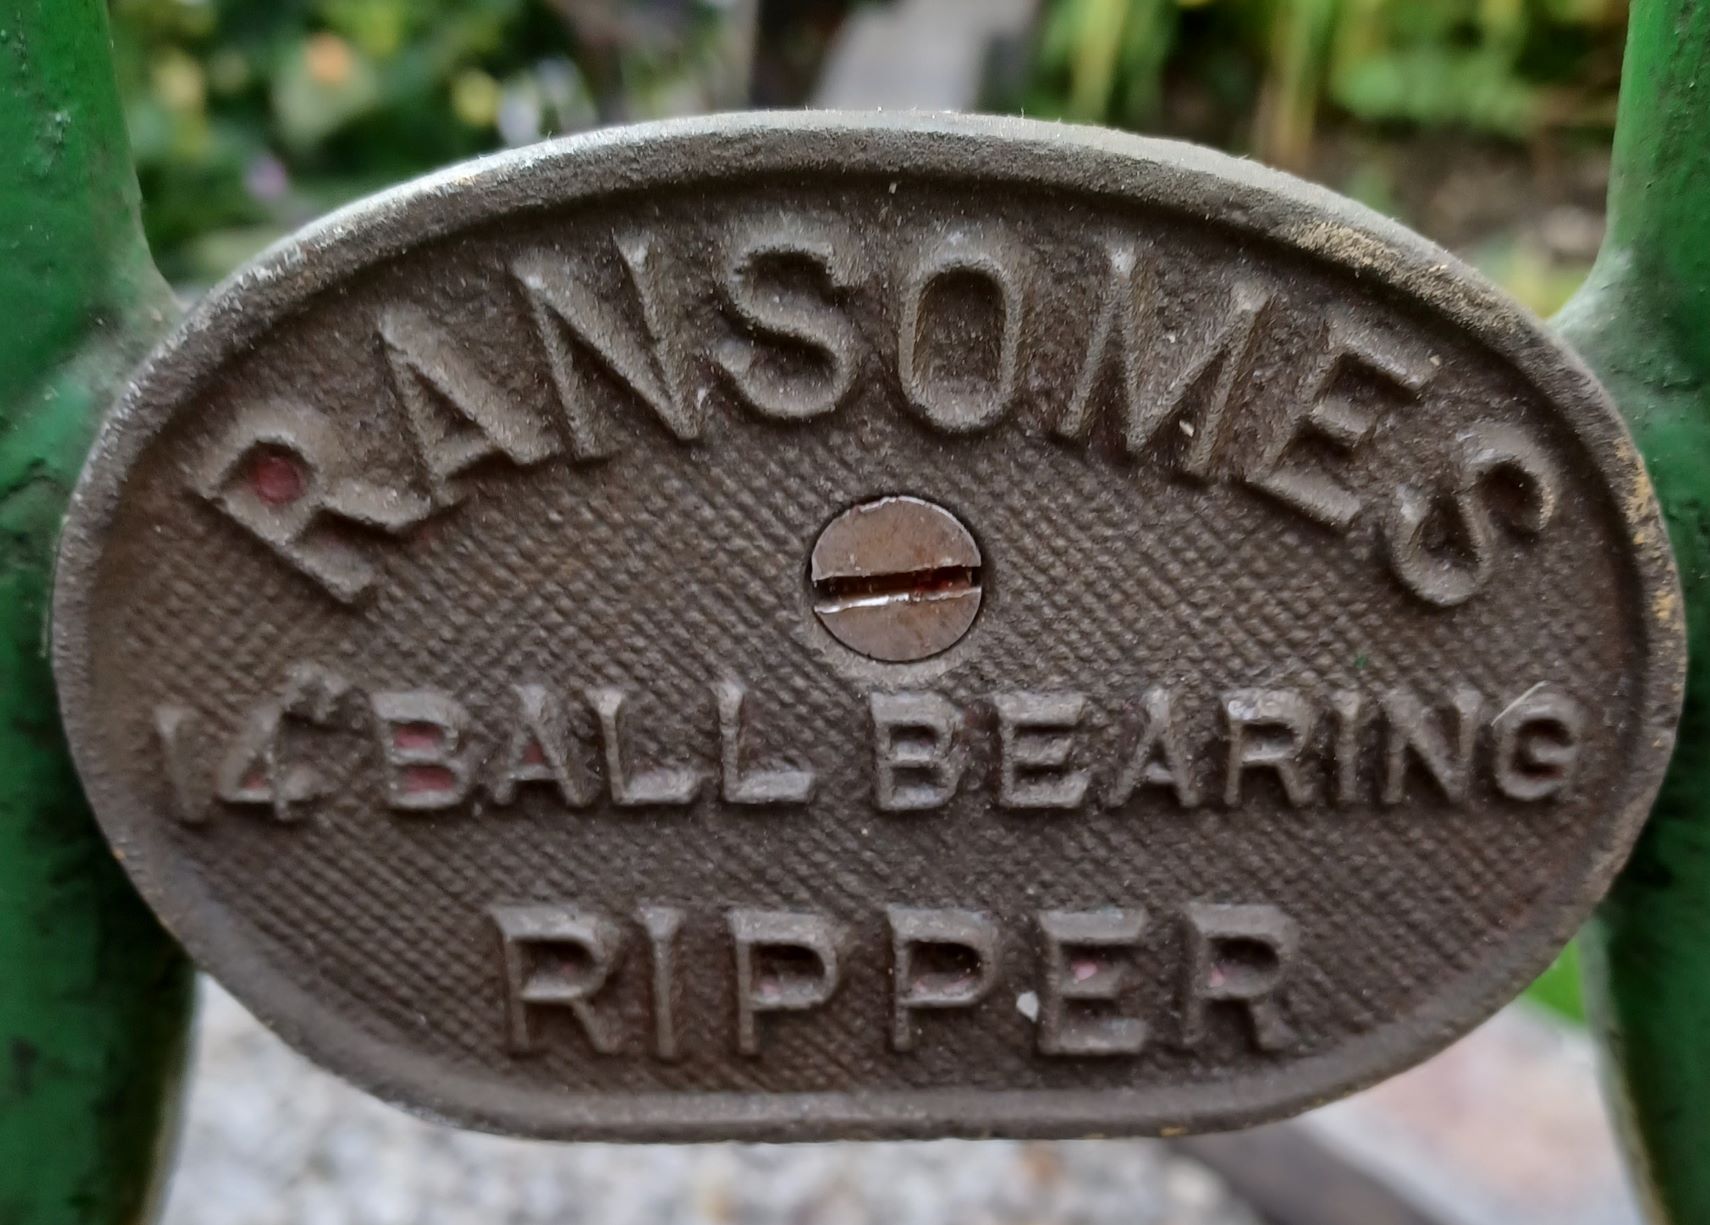 Ransomes Ripper badge